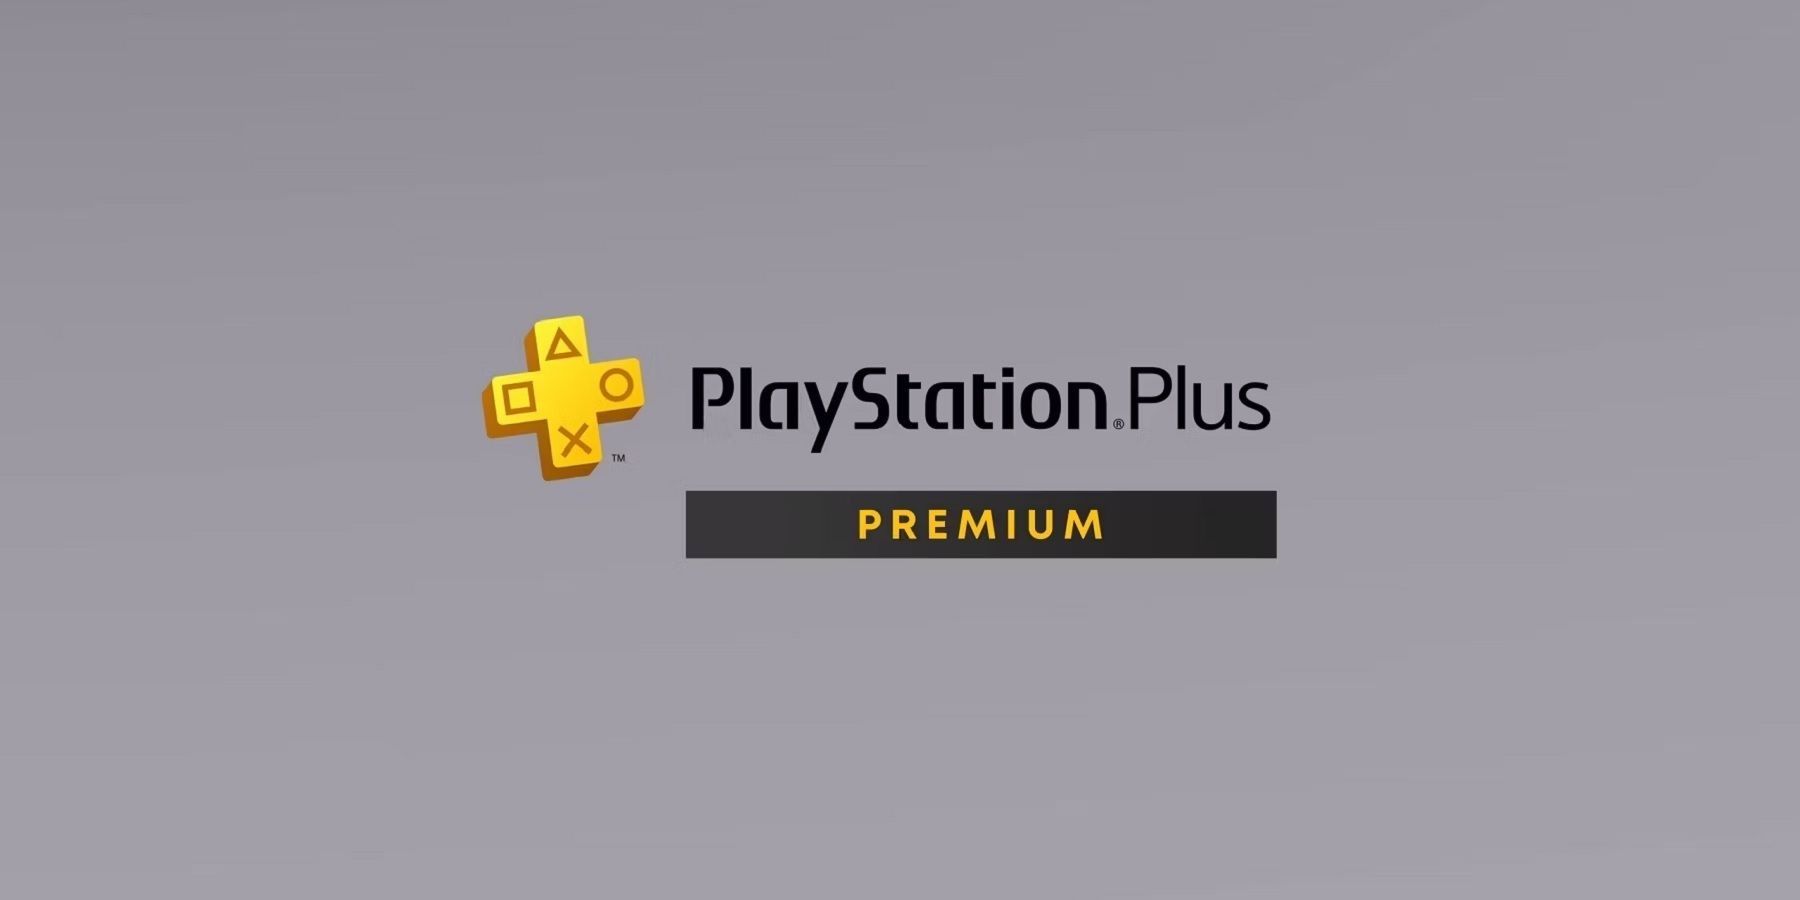 ps plus premium new sony first party trial